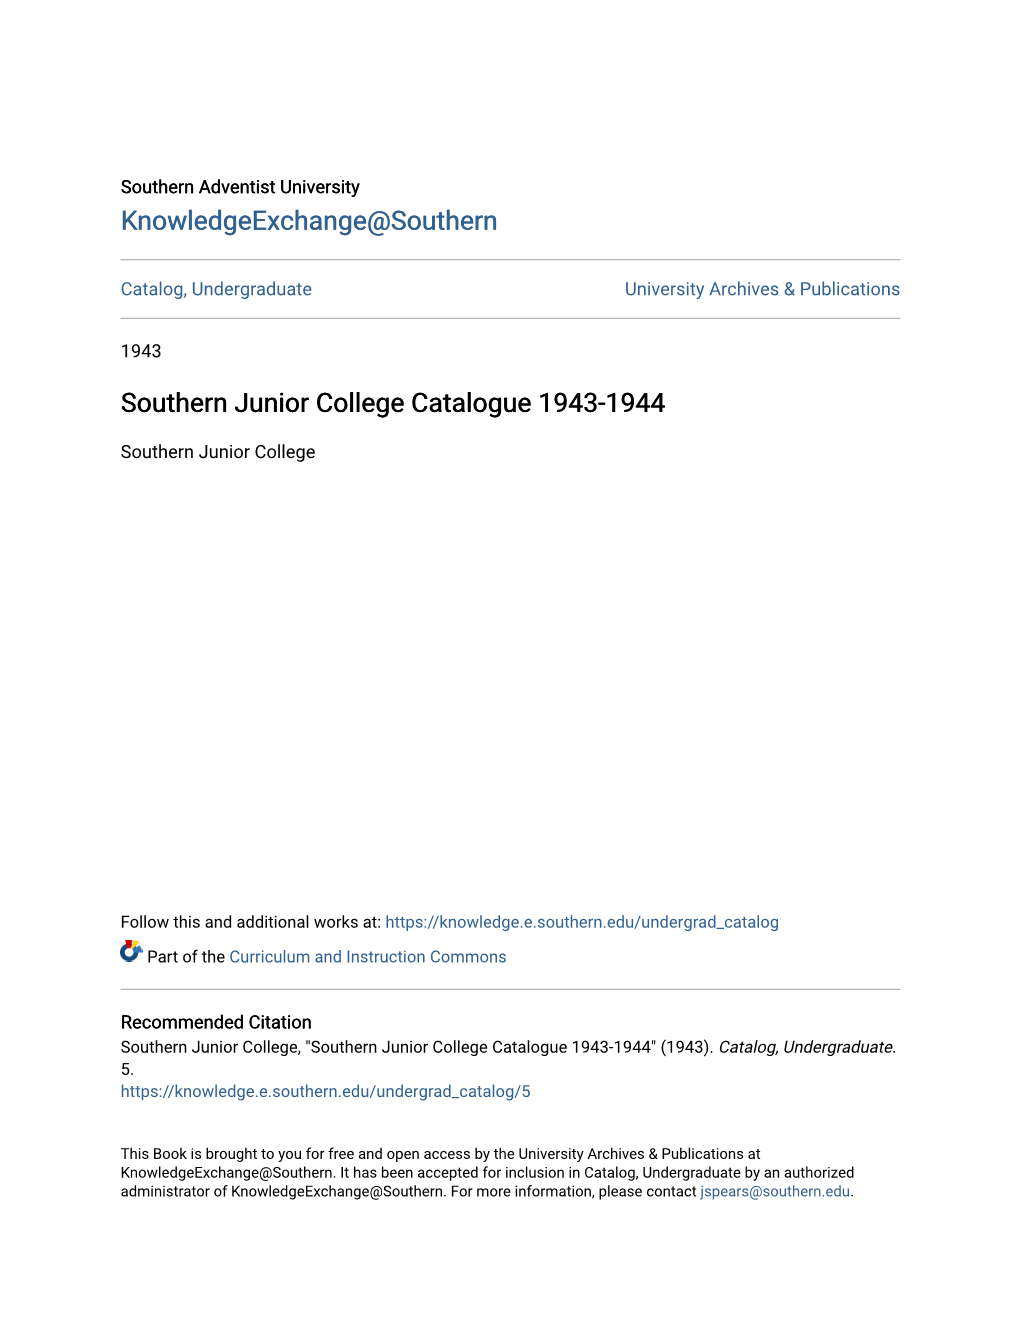 Southern Junior College Catalogue 1943-1944